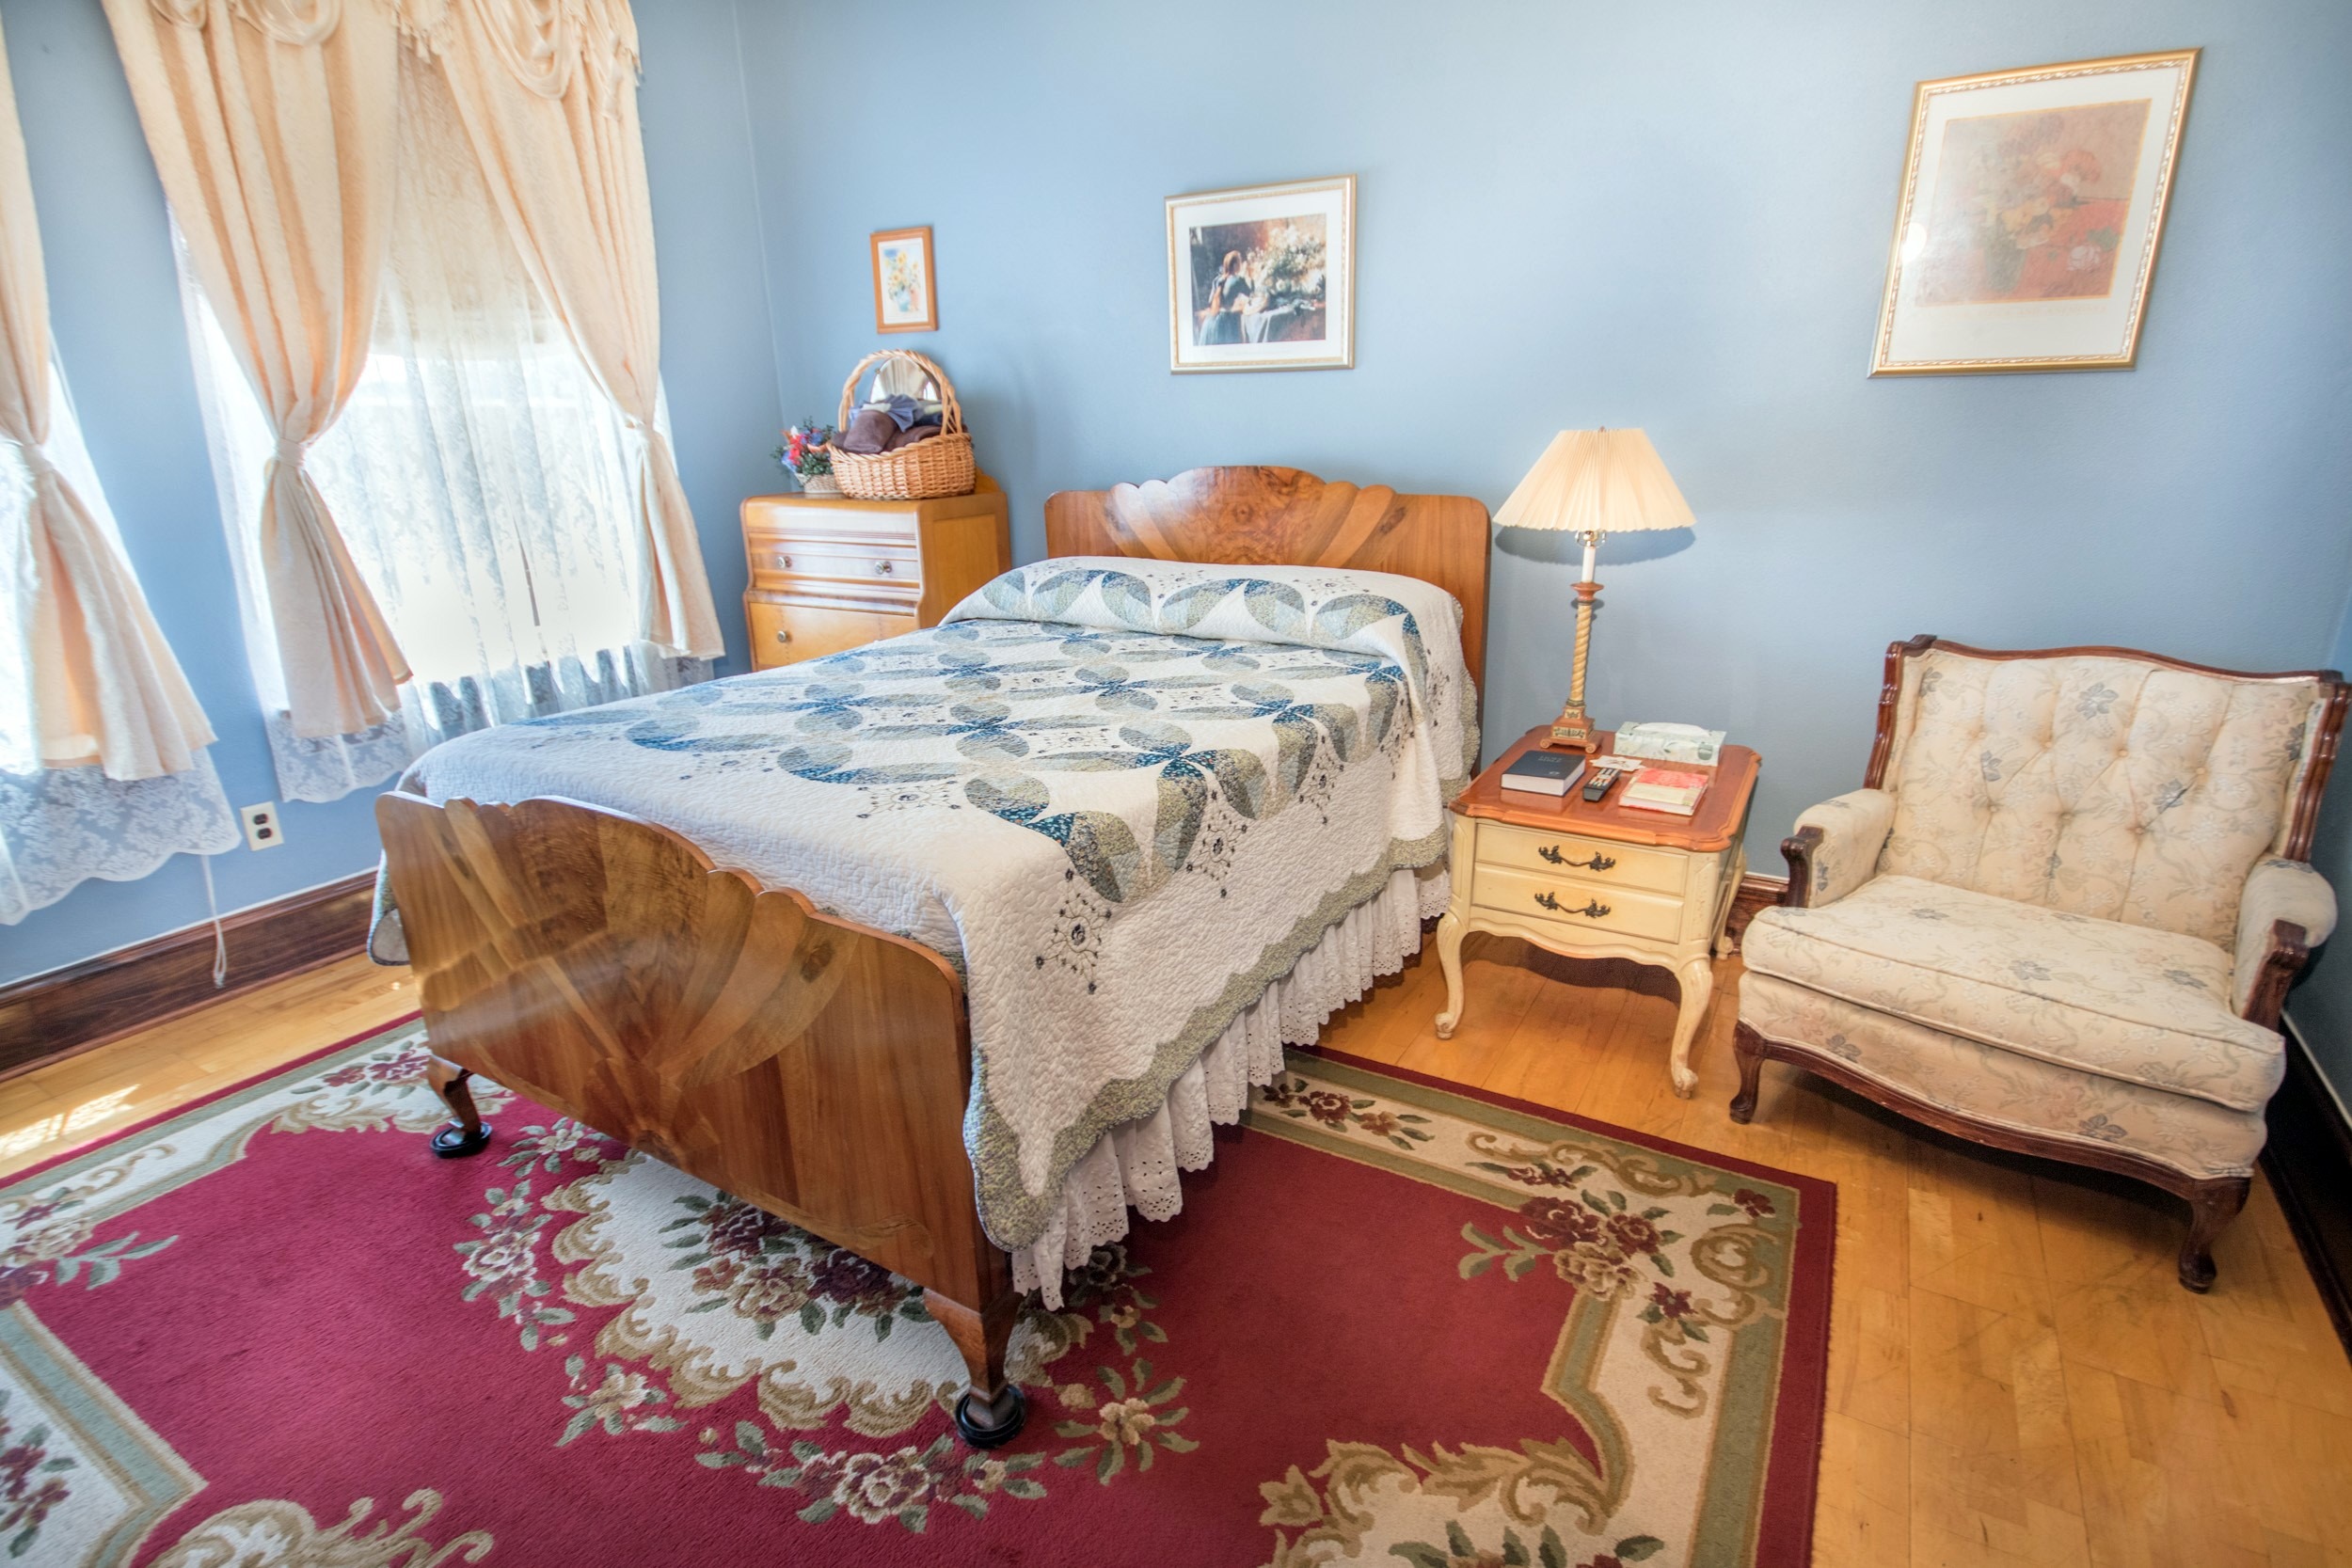 Hotel room with hardwood floors and blue walls